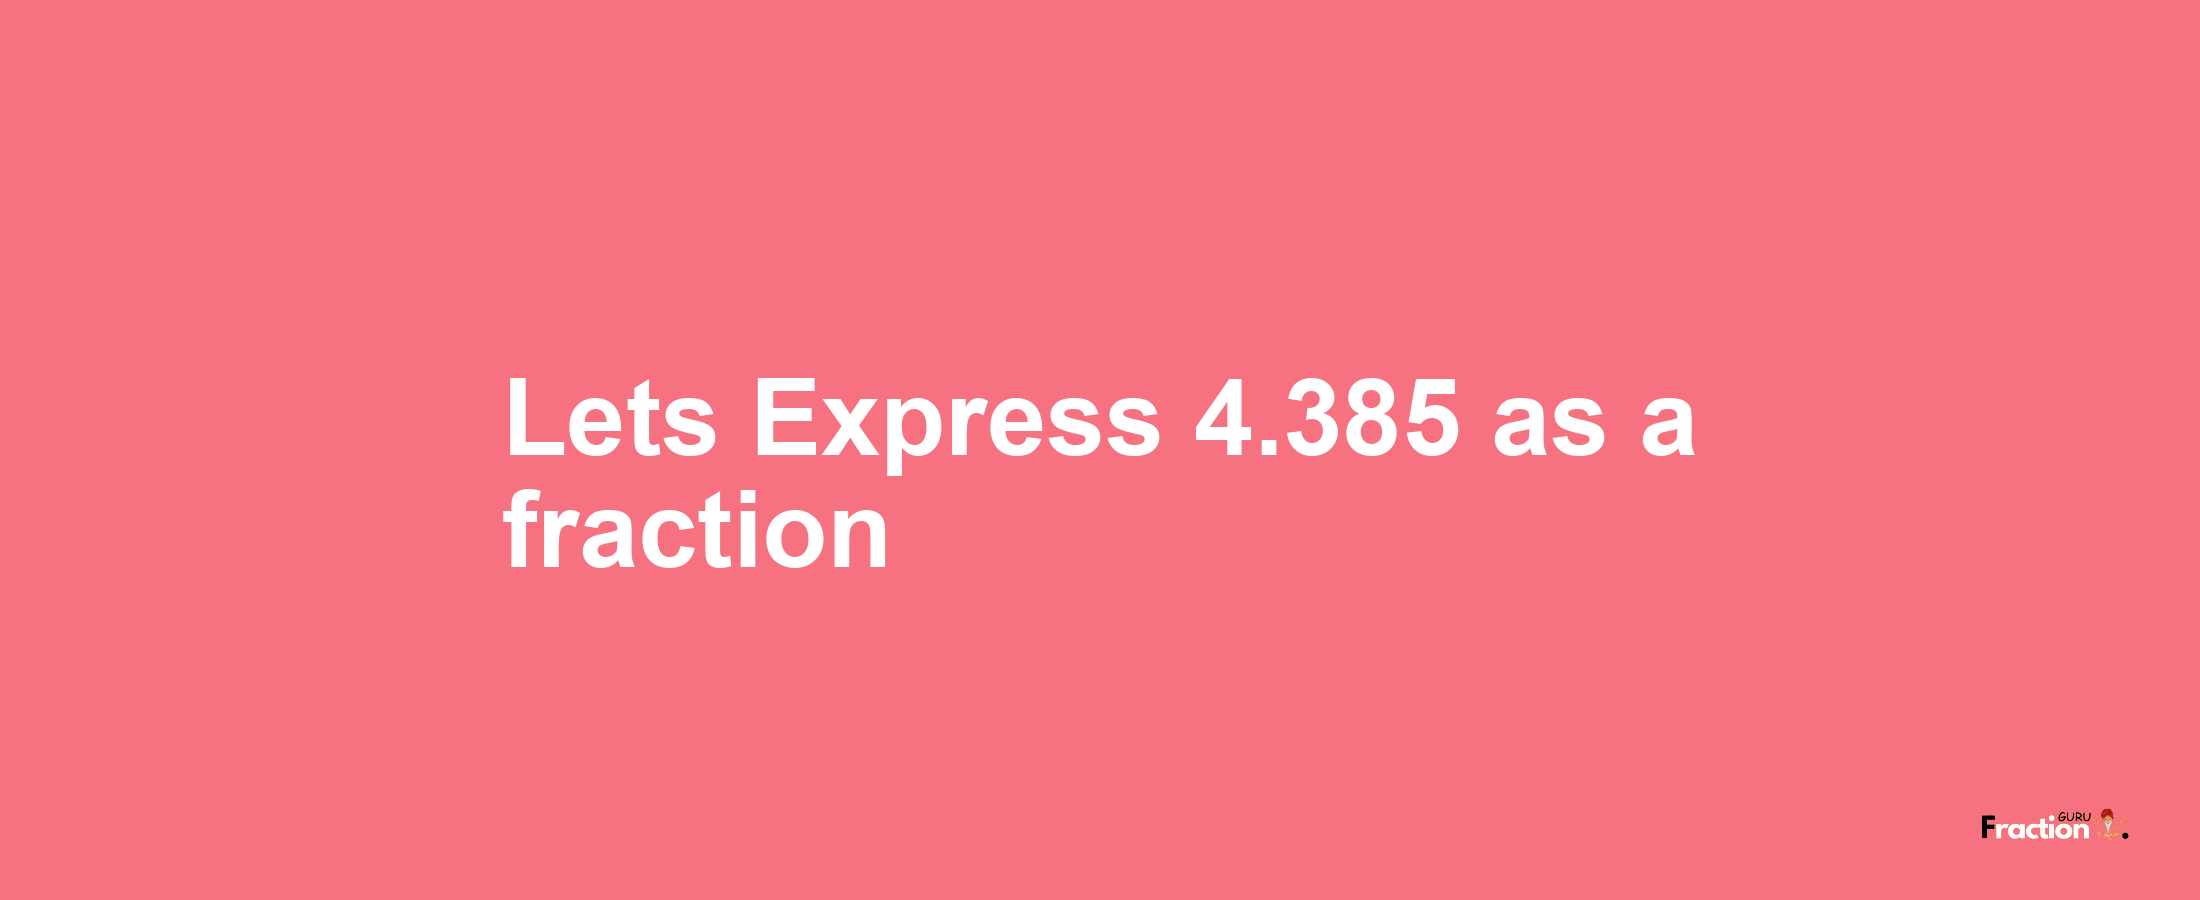 Lets Express 4.385 as afraction